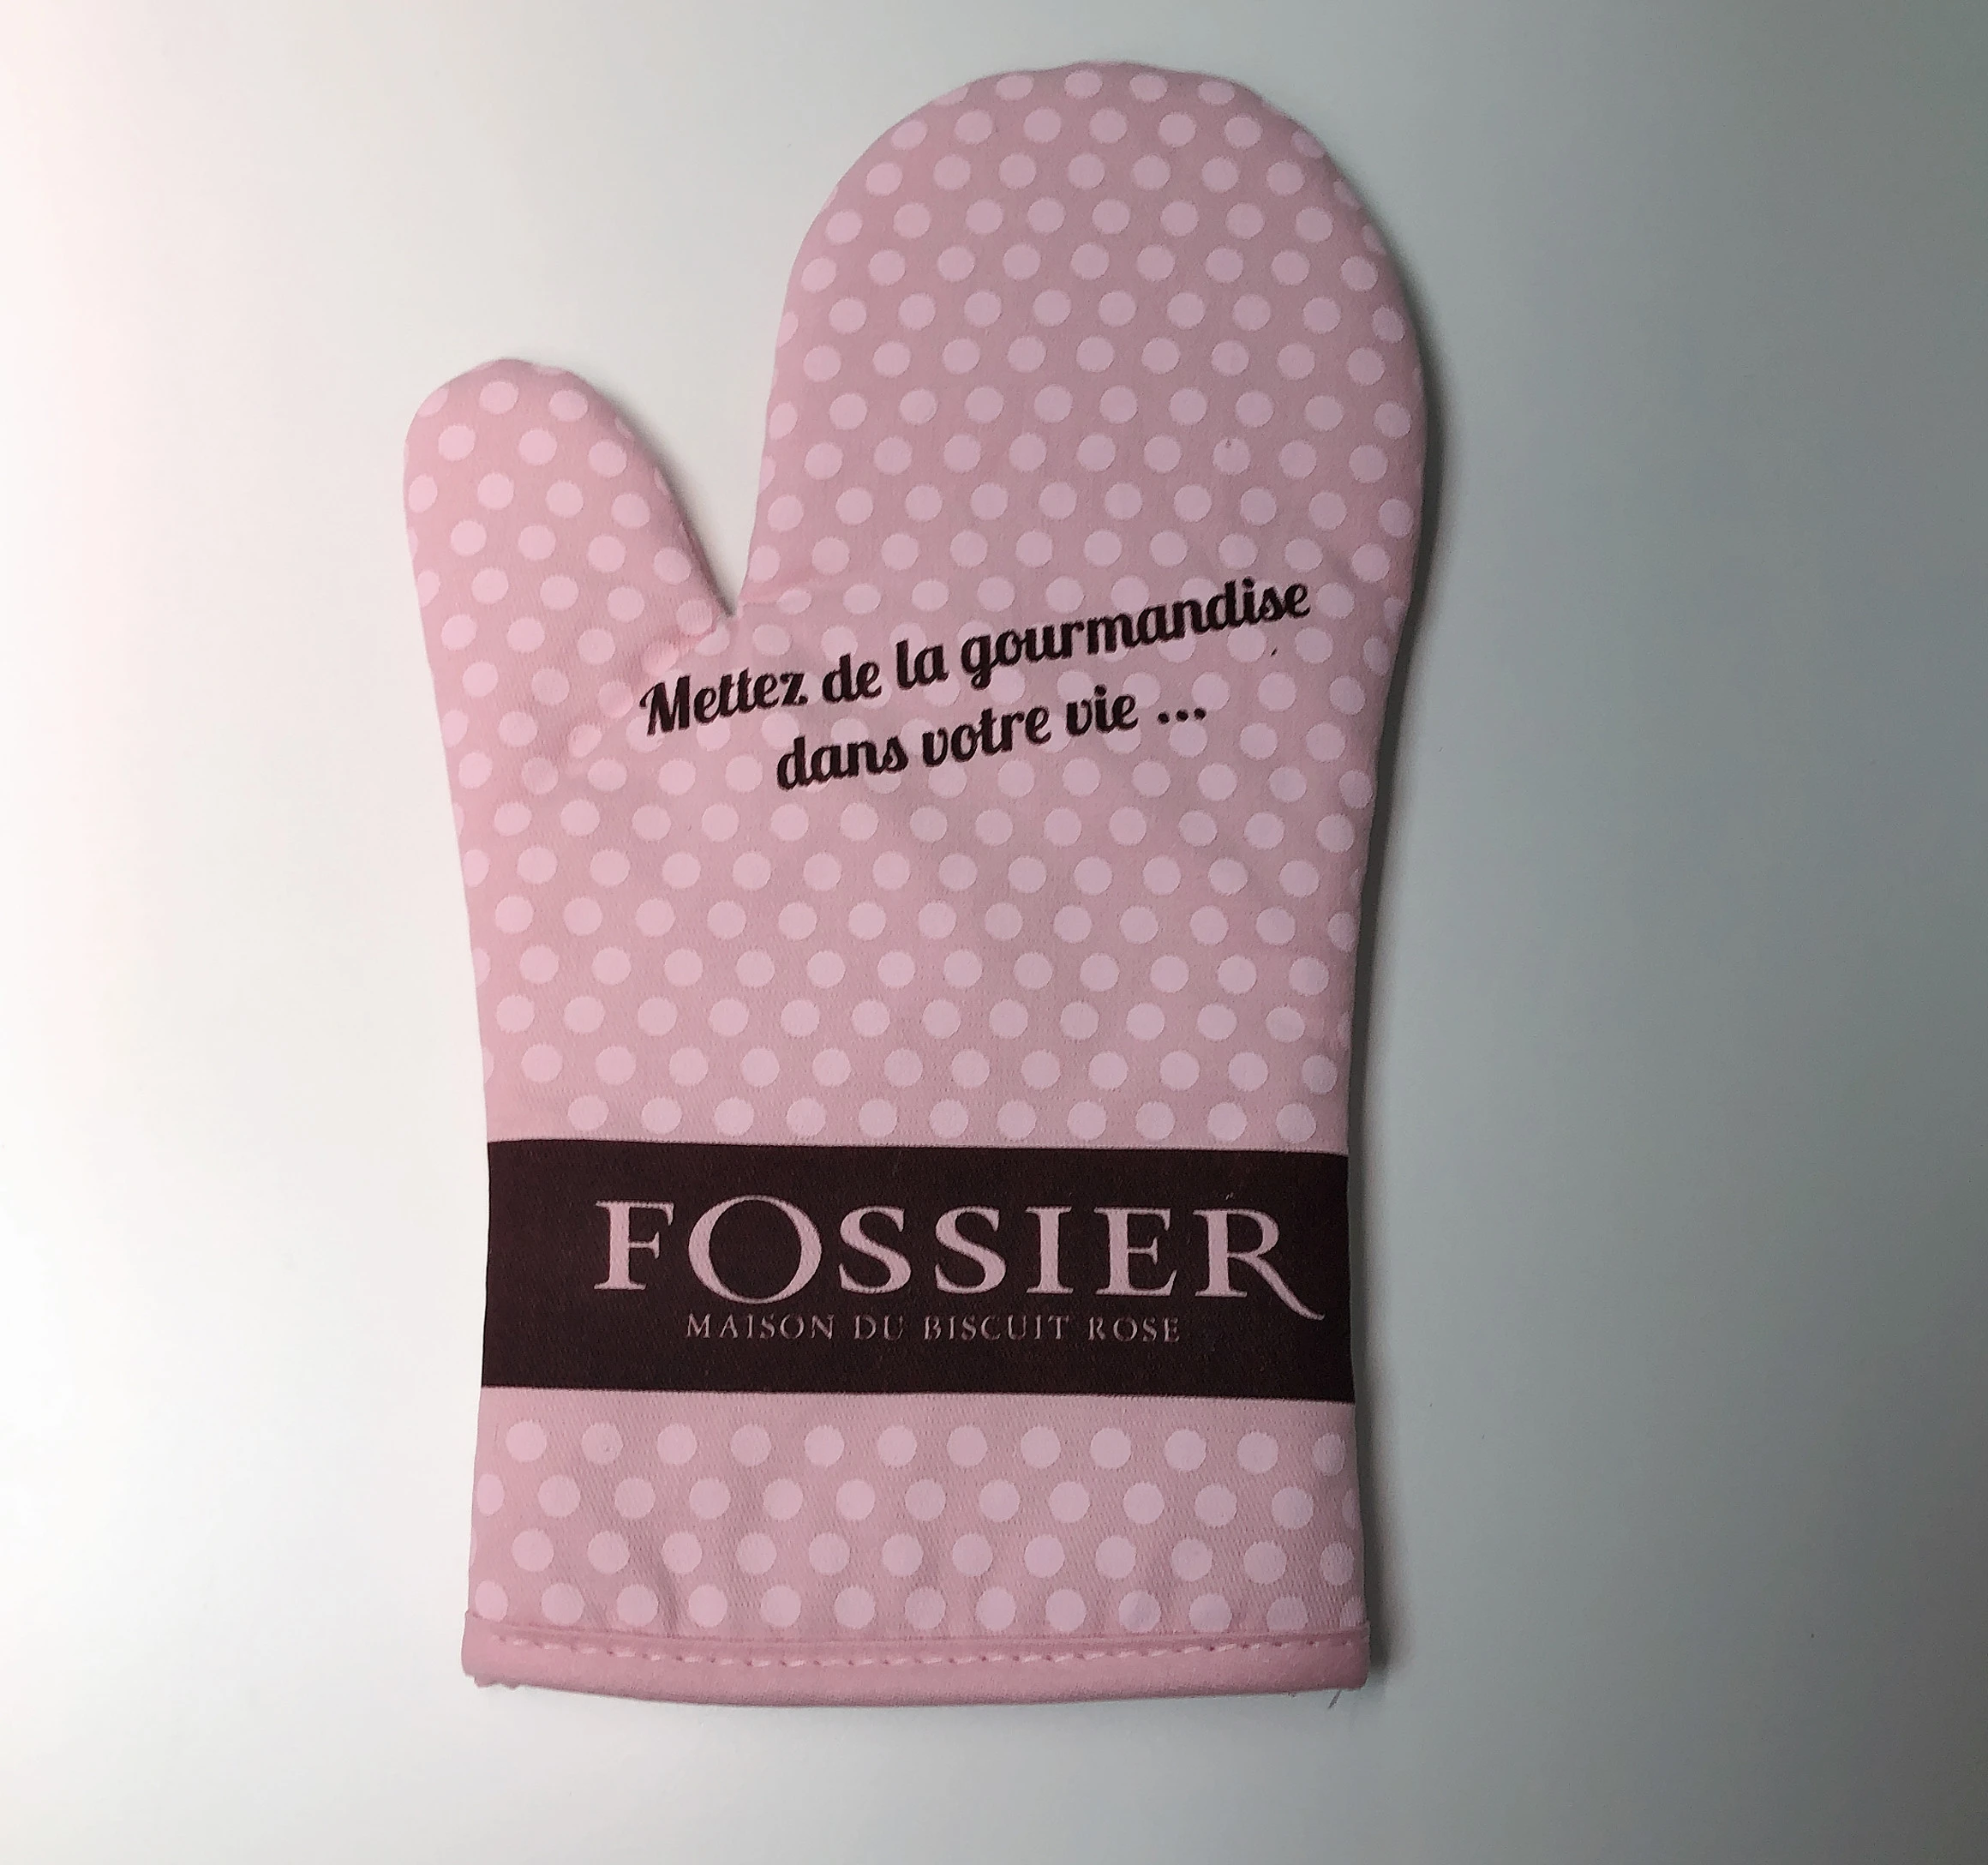 cotton microwave oven mitten with high quality